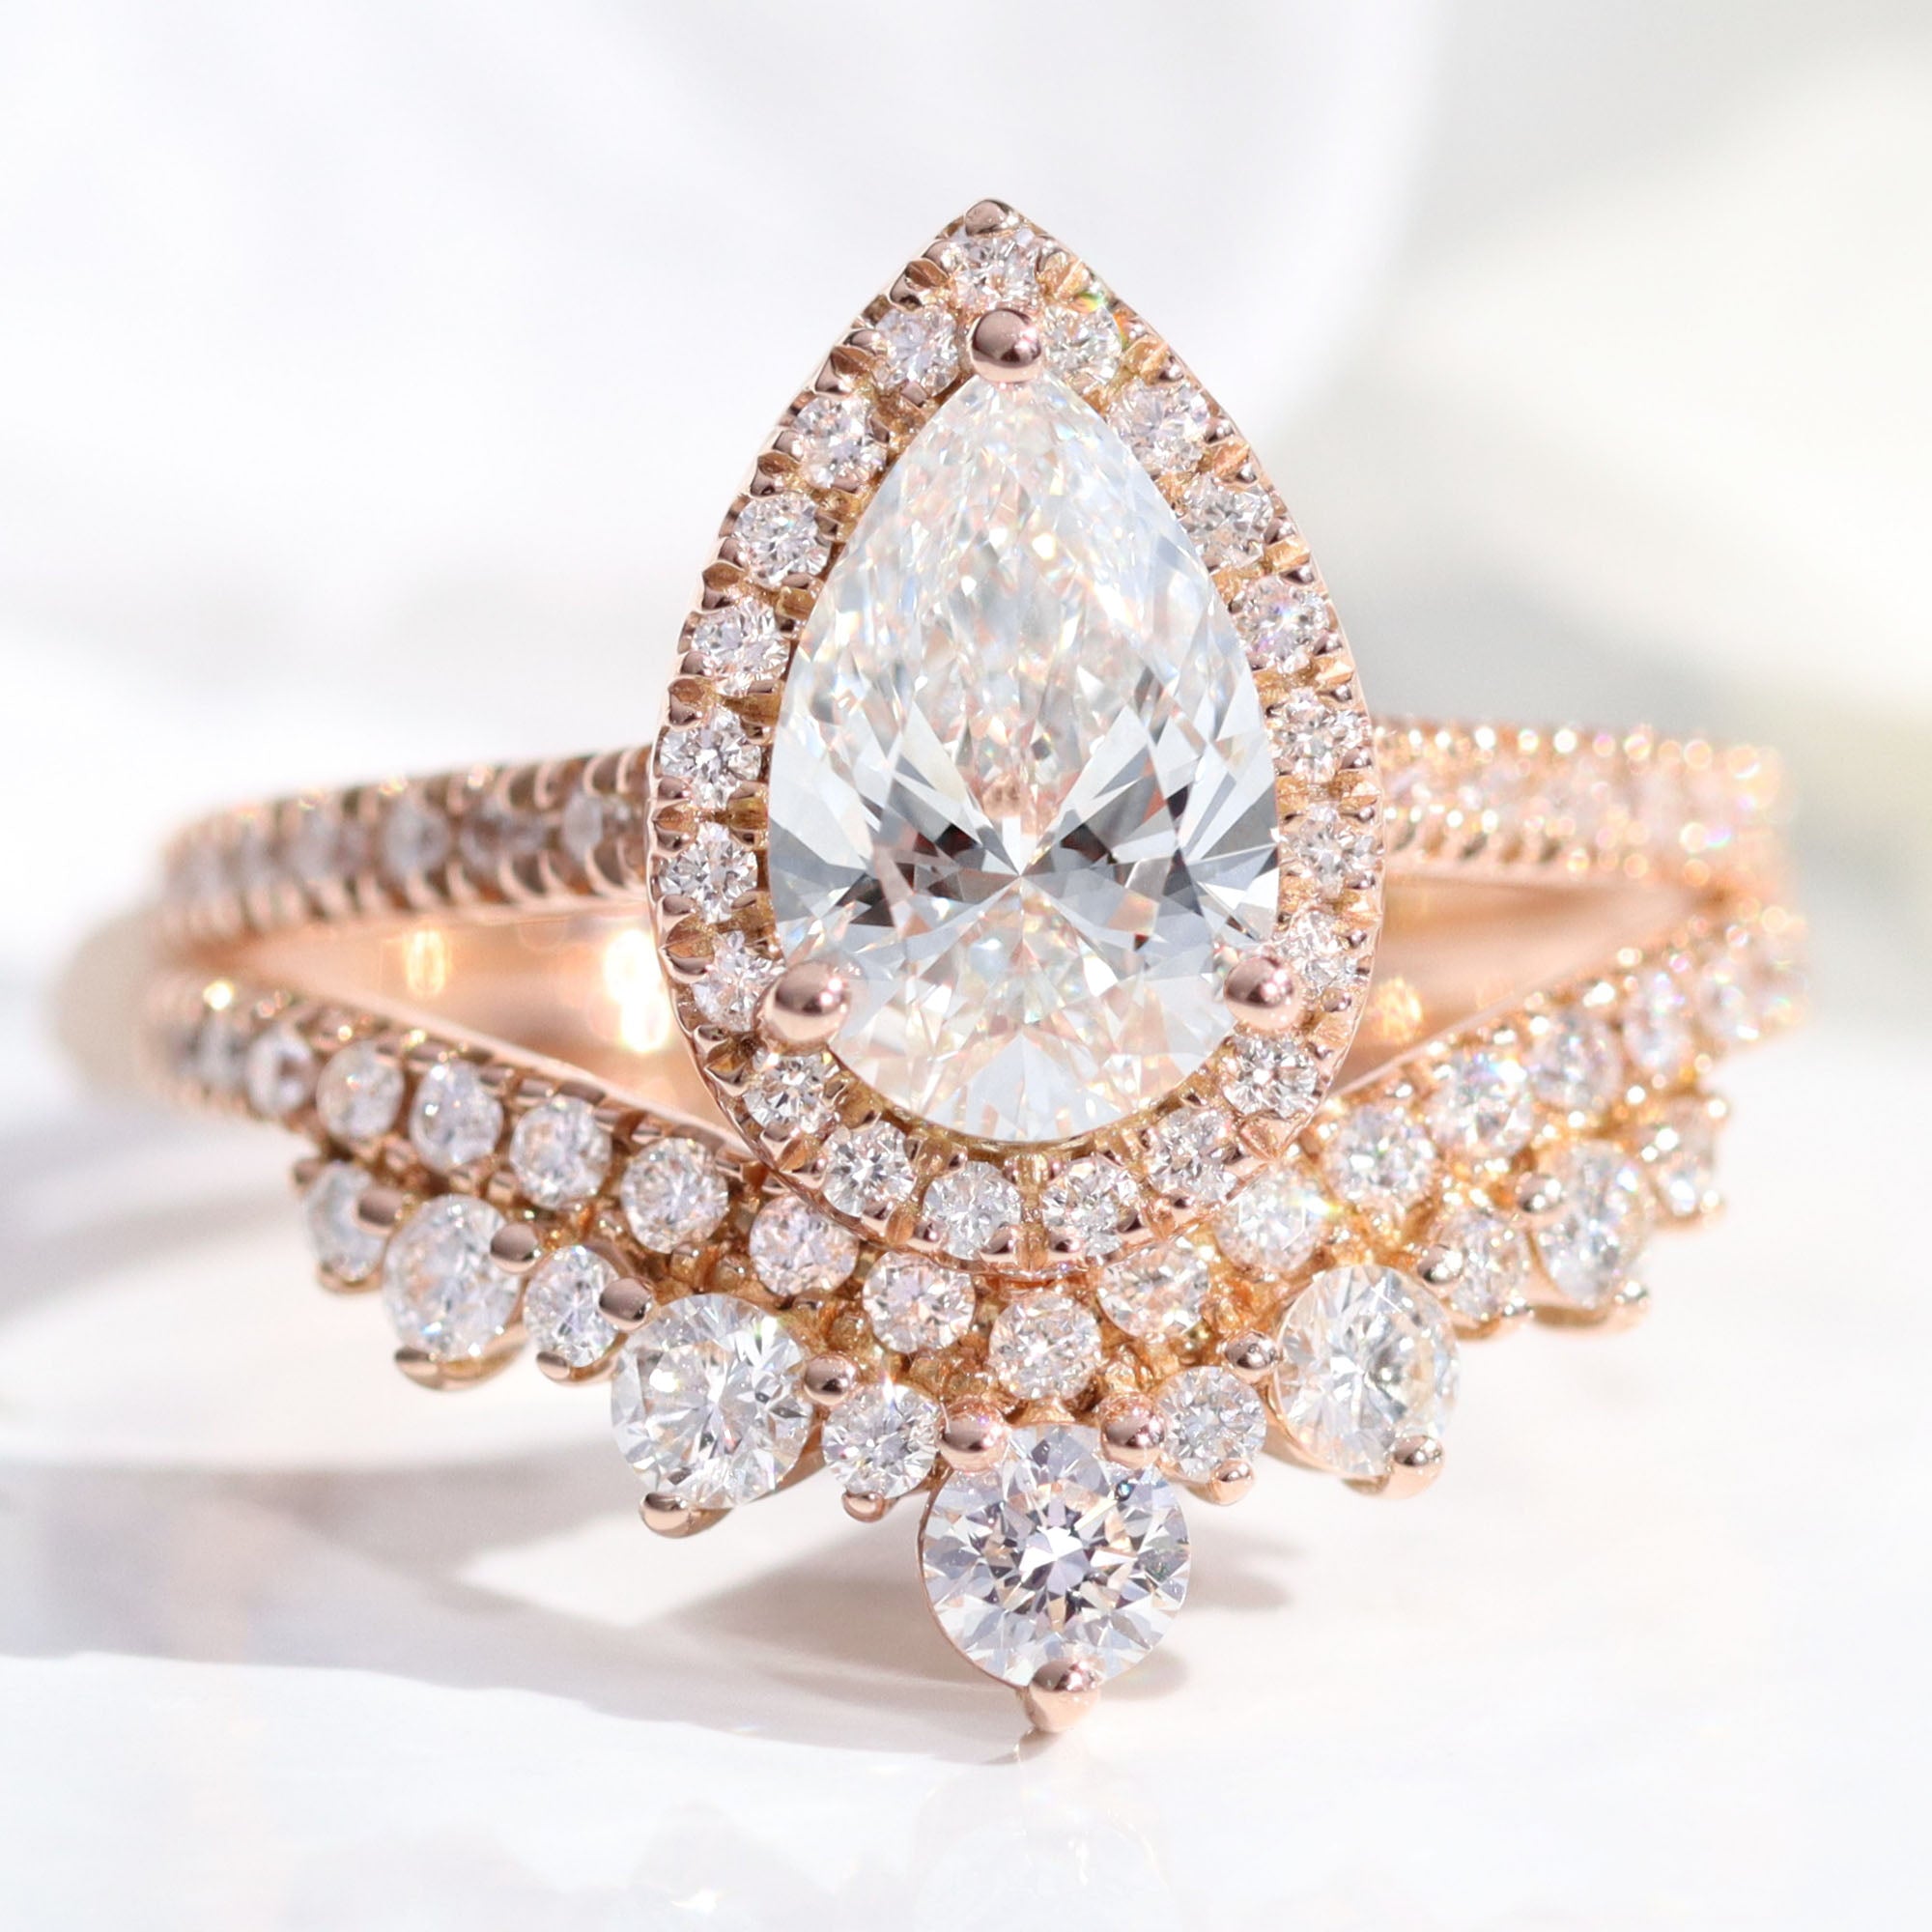 Stuart Dunkin on LinkedIn: Your search for the perfect diamond ends here!  Dunkin's Diamonds is your…